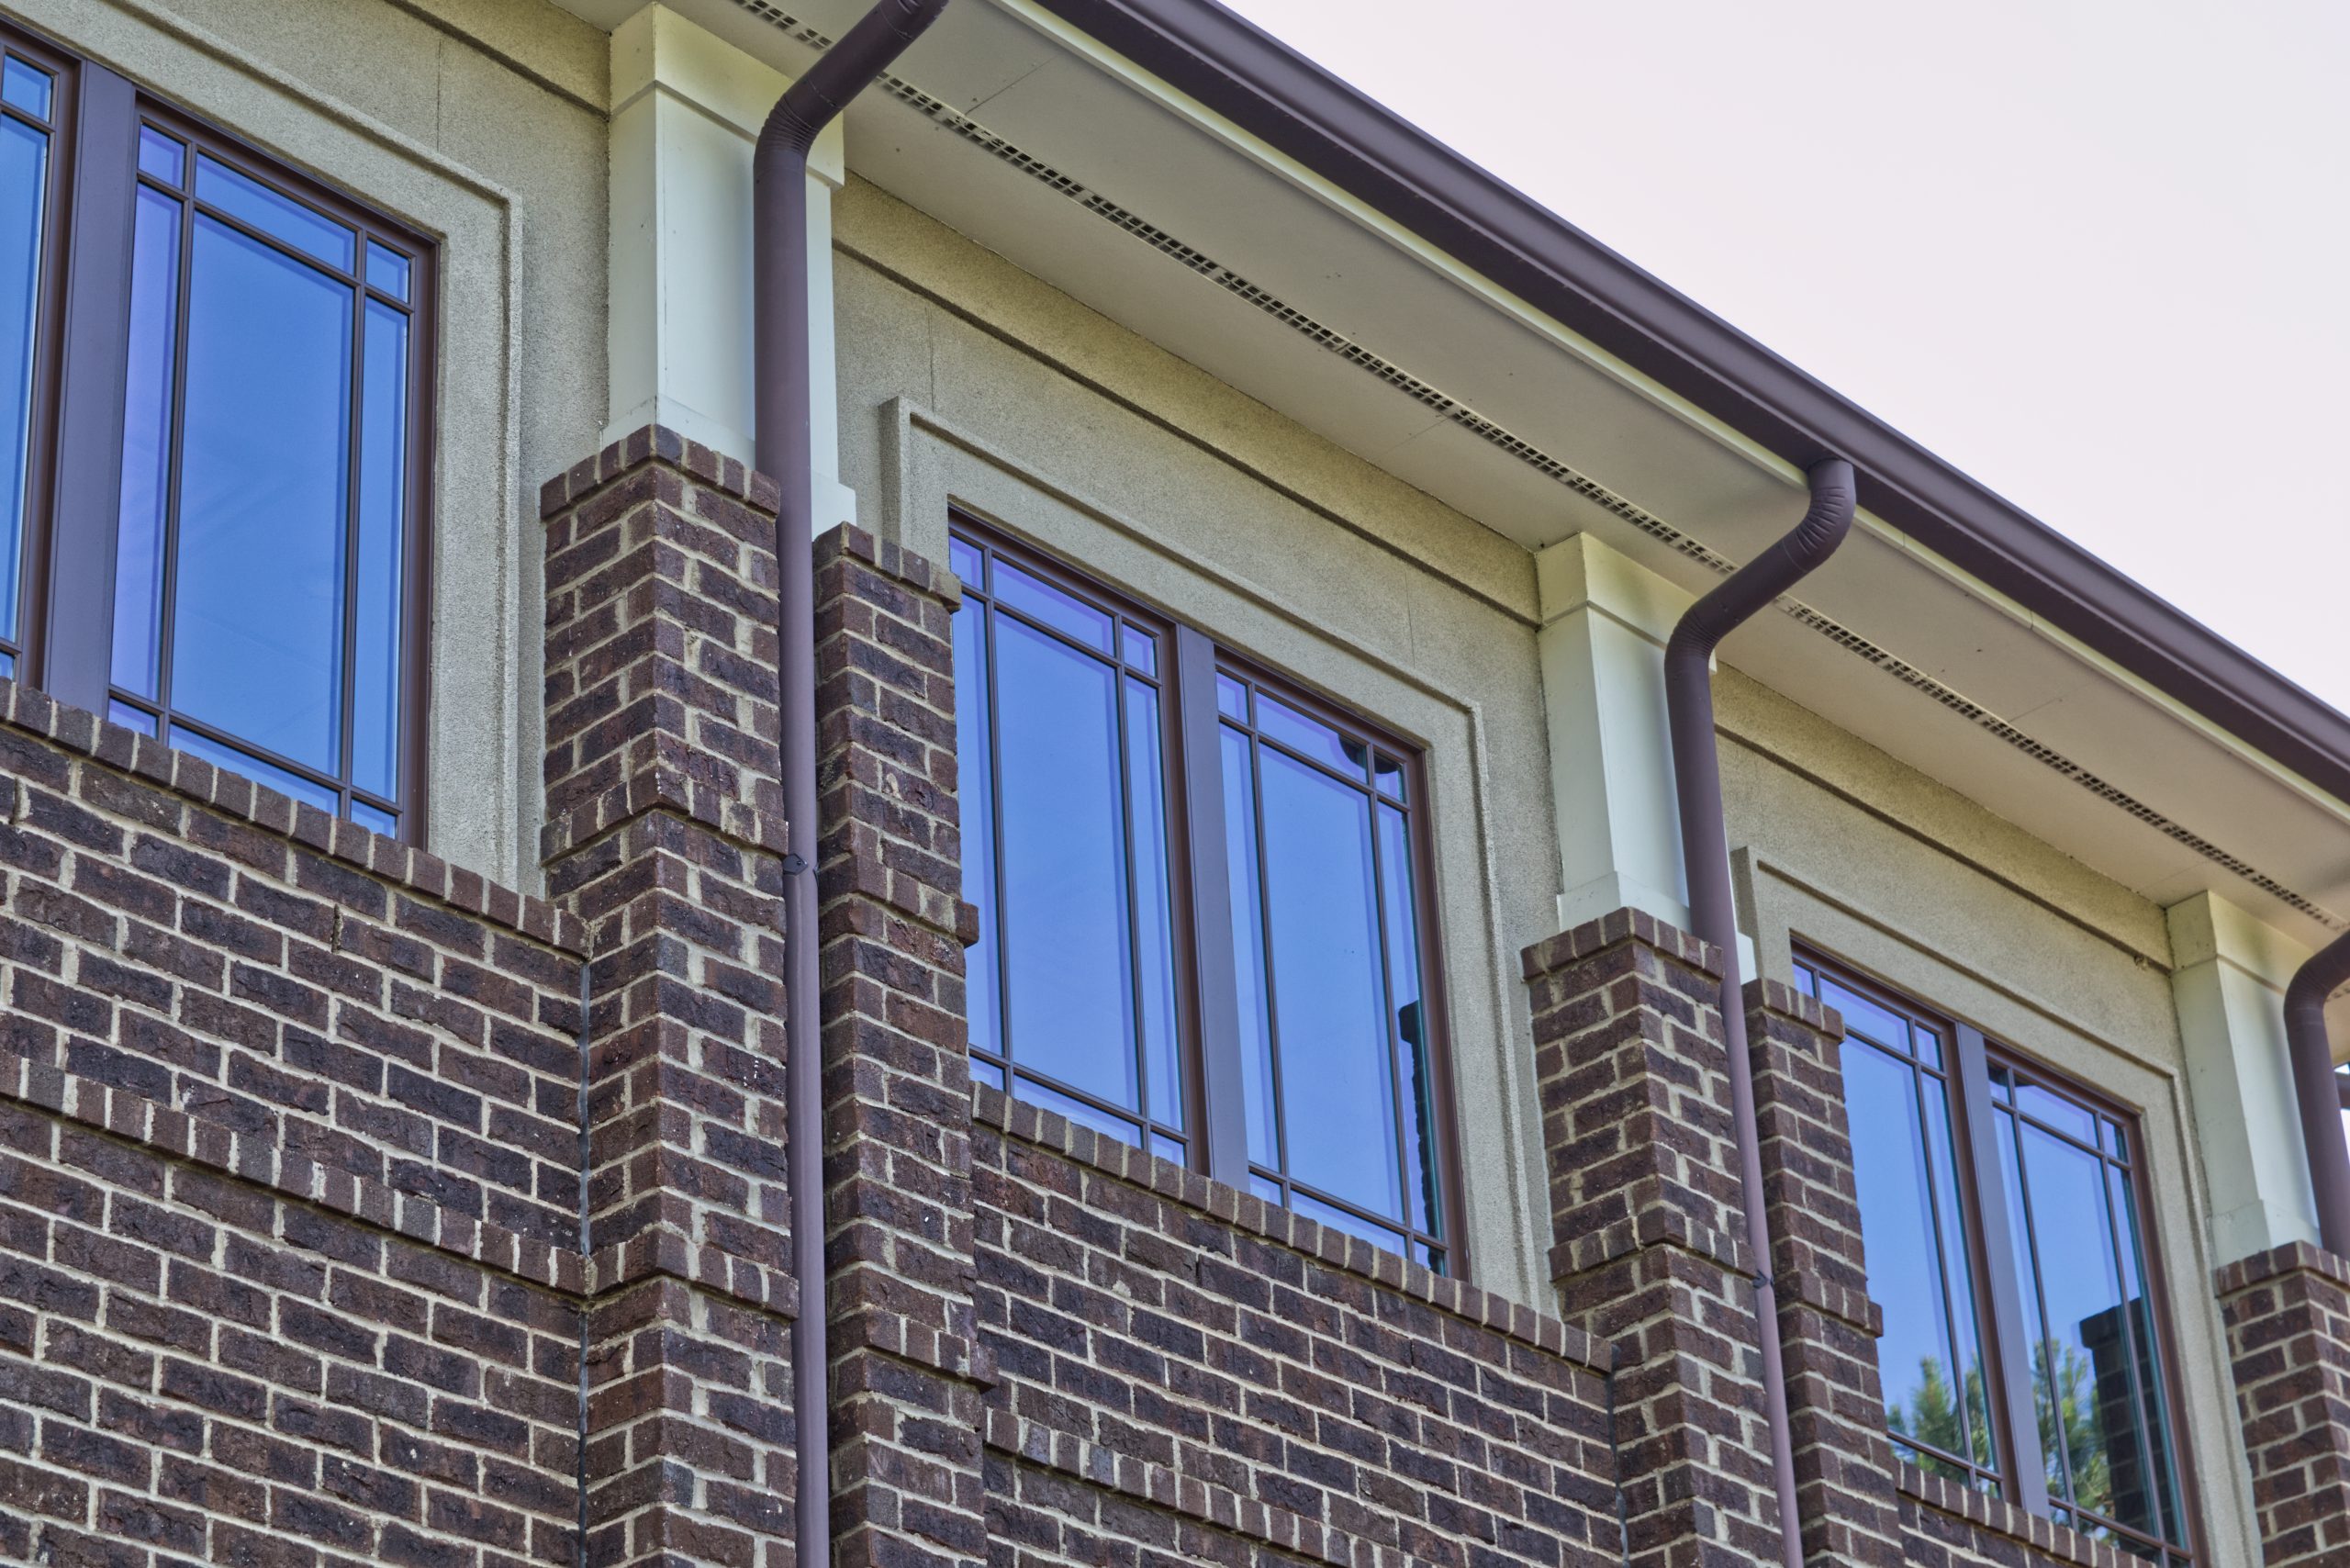 Brown seamless gutters against large brick and stucco commercial building with glass windows